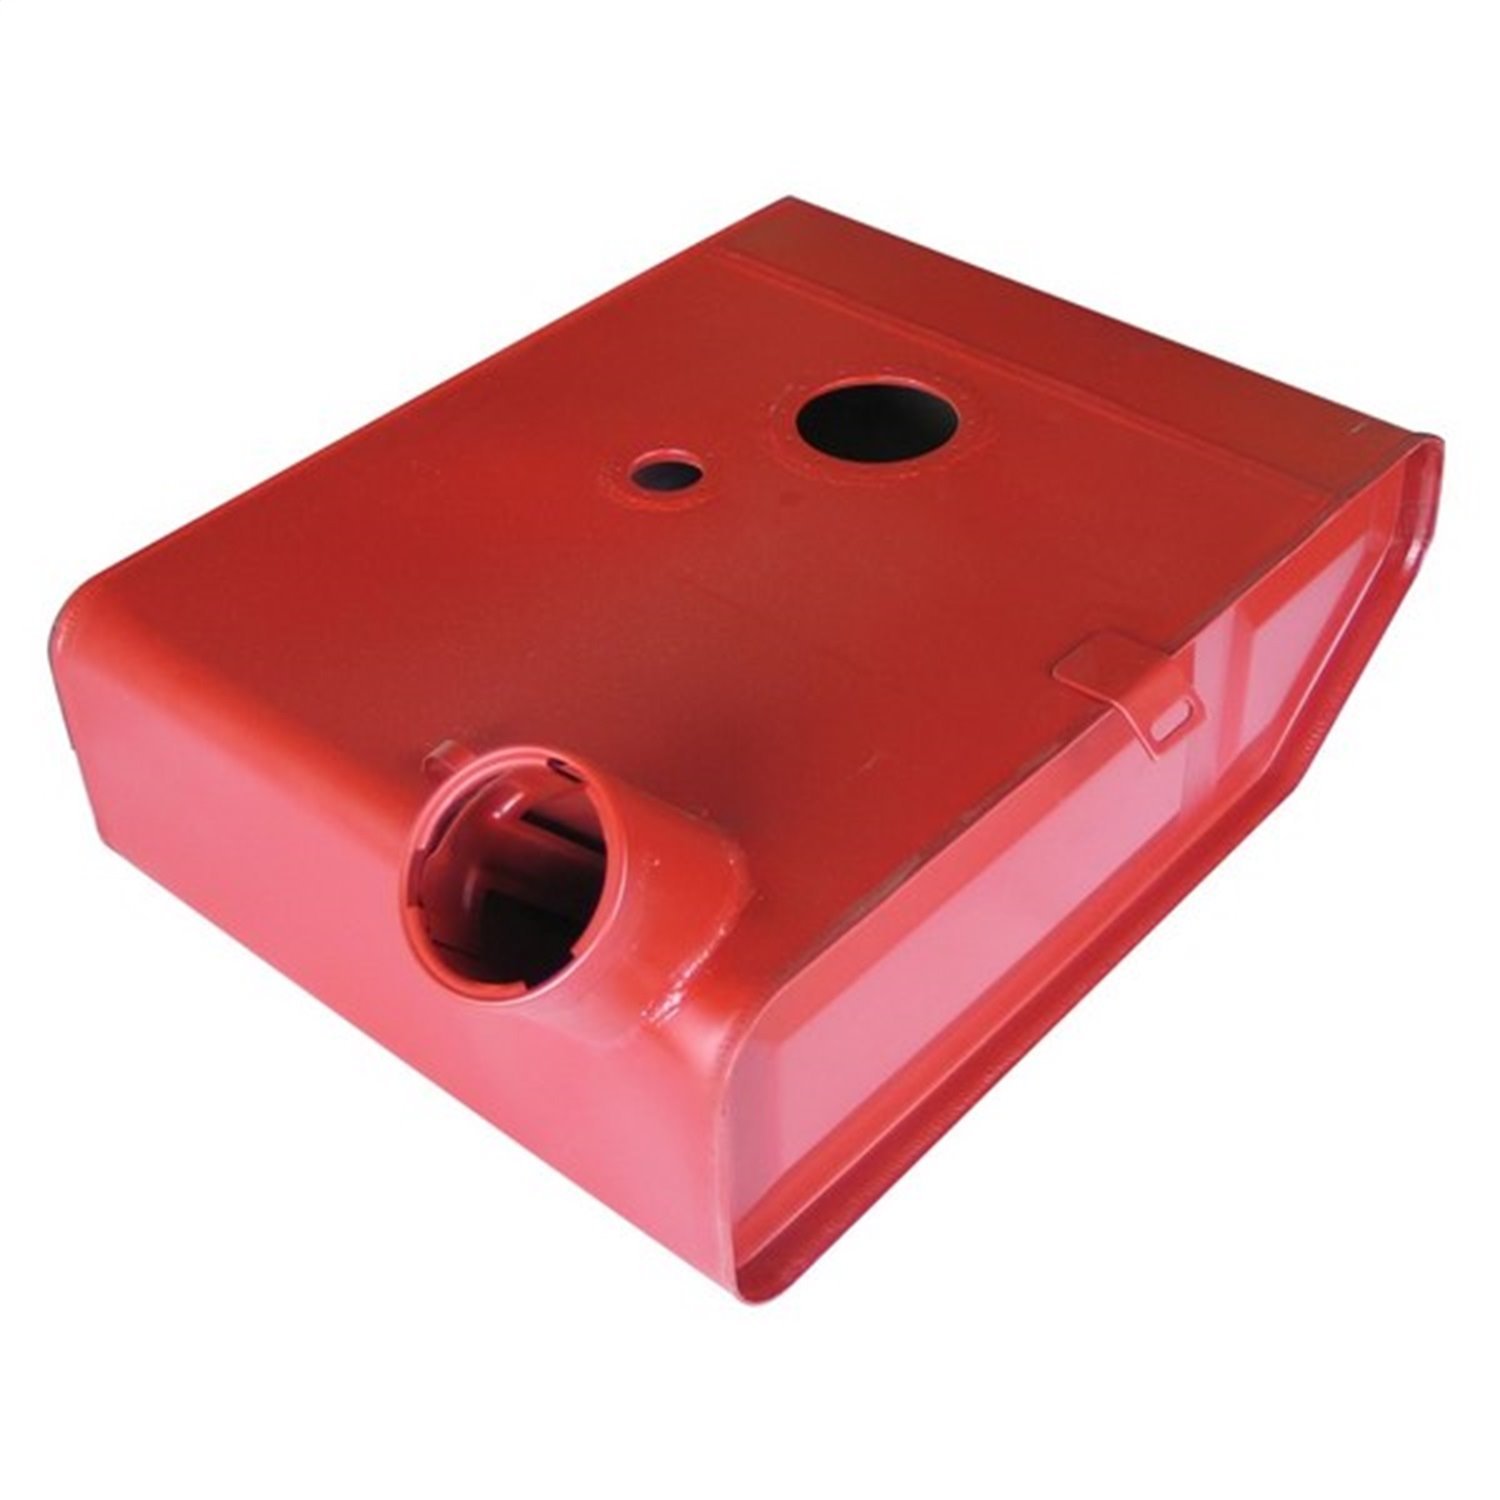 This metal replacement Gas/Fuel tank from Omix-ADA has the large filler neck and fits 43-45 Willys MBs and Ford GPWs.